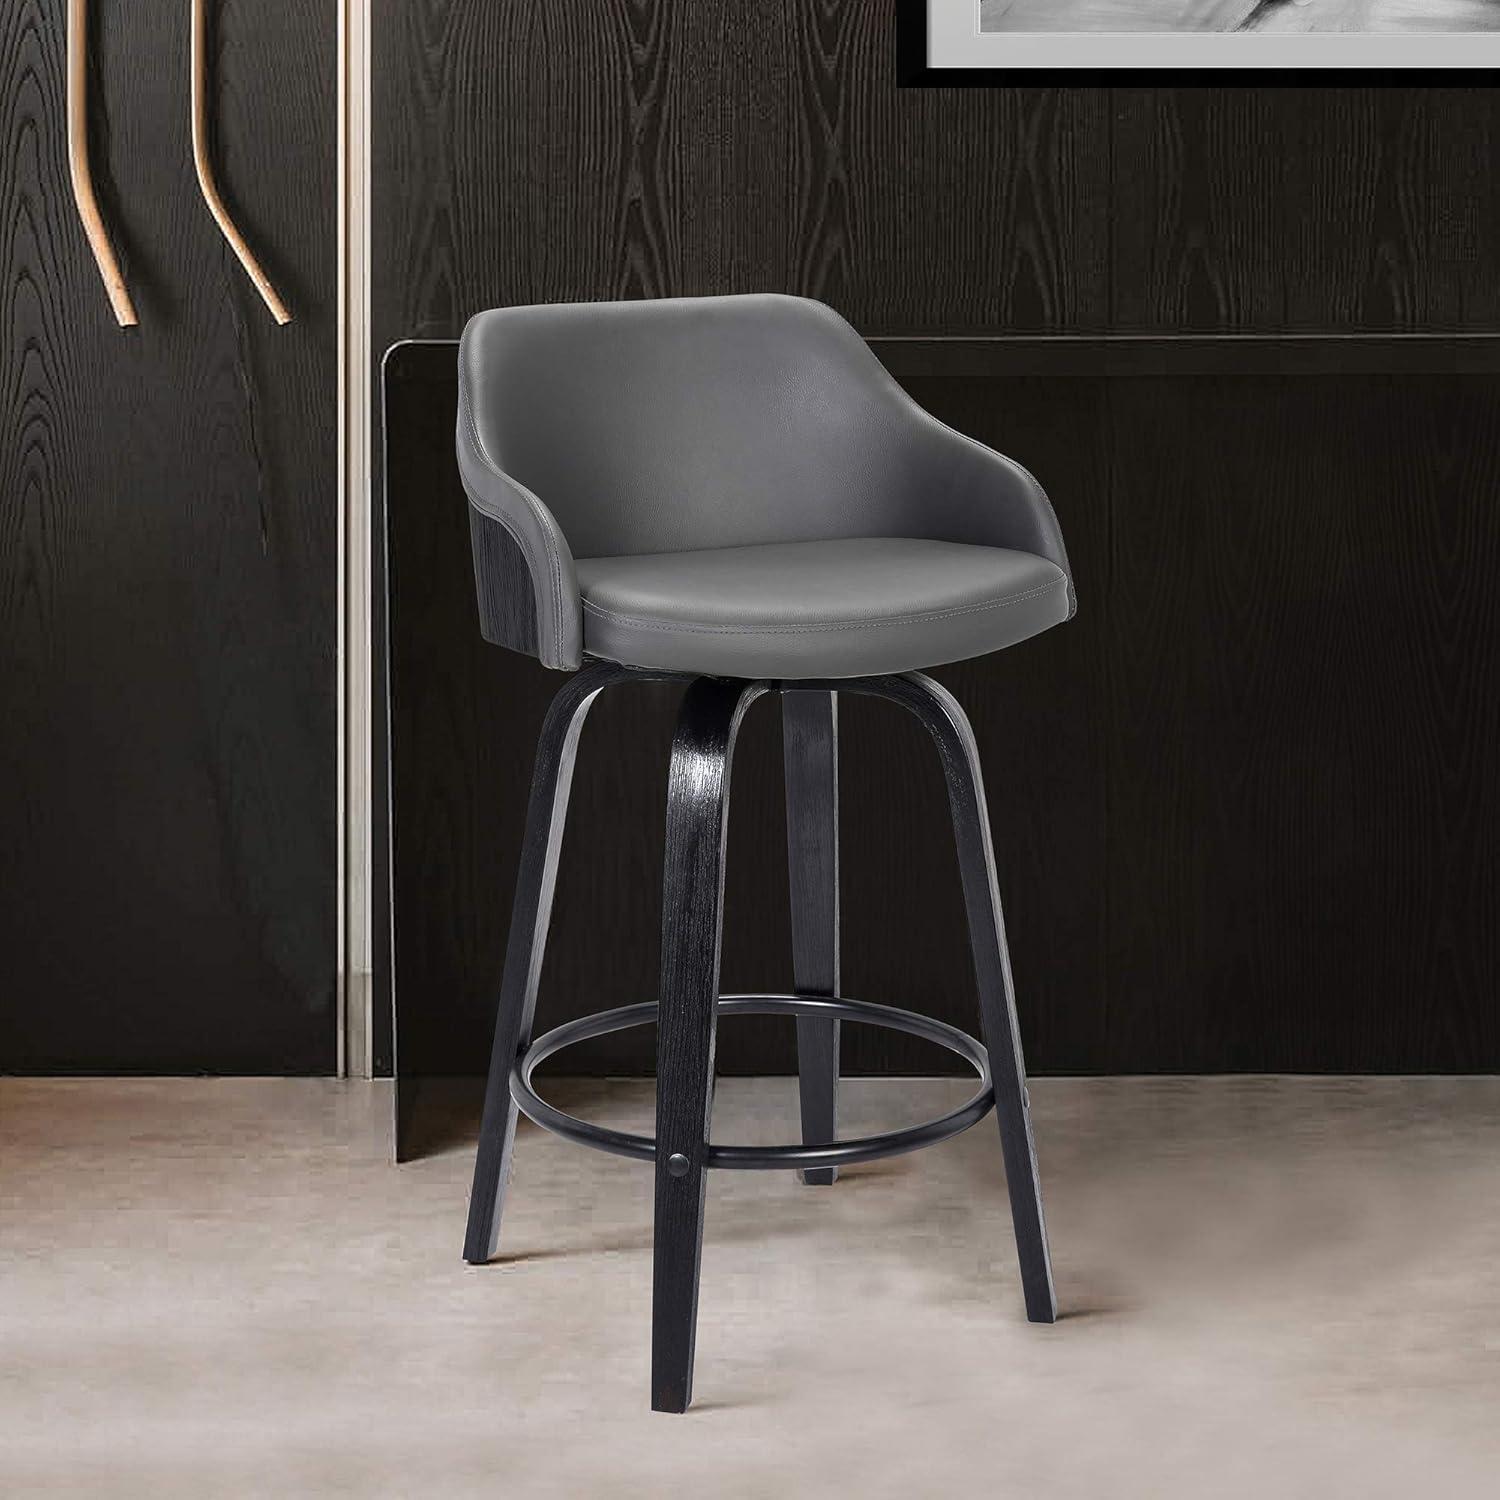 Alec Contemporary Black Wood & Grey Faux Leather Swivel Barstool, 30"